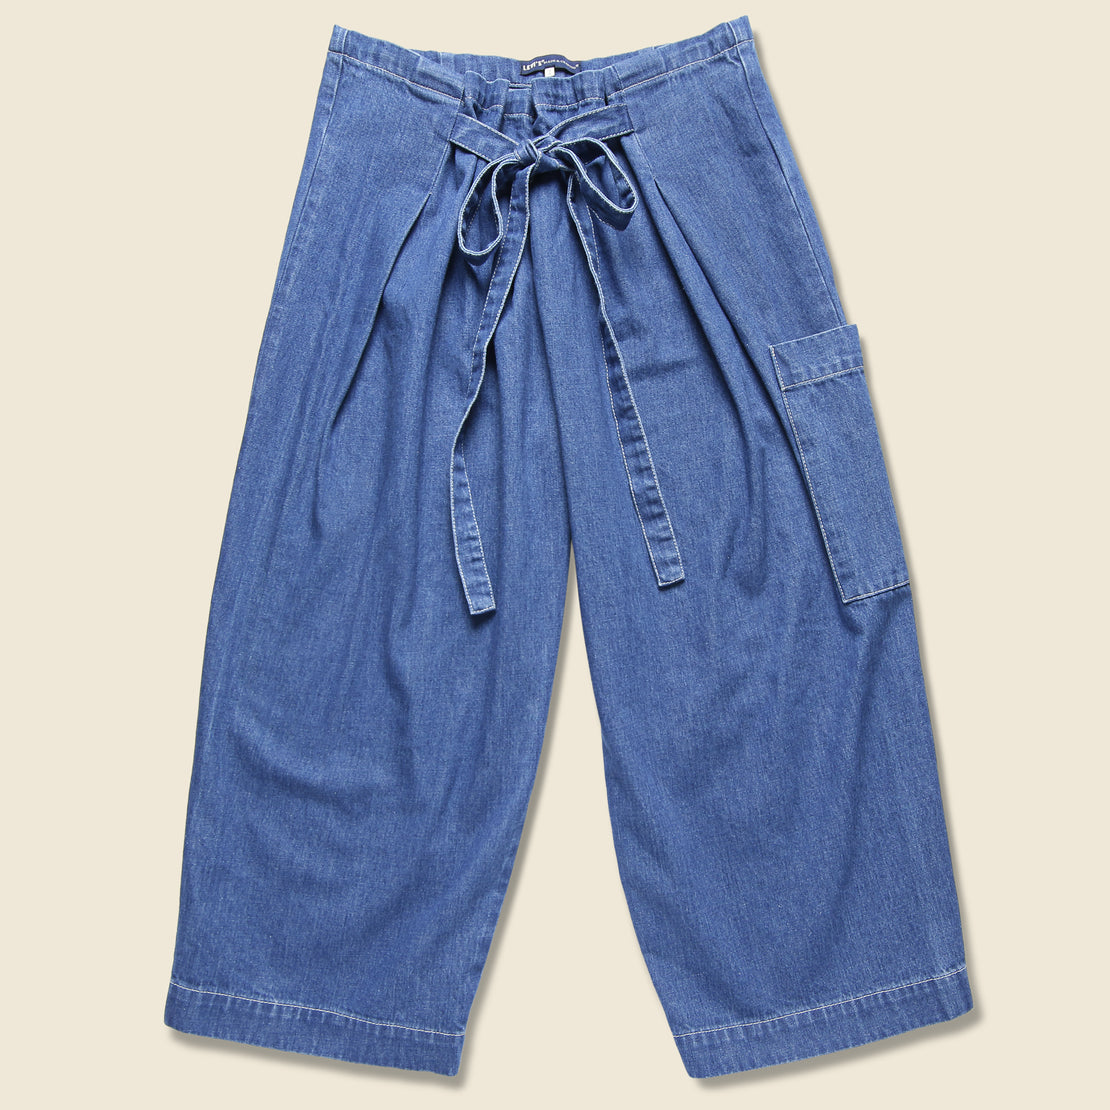 Levis Made & Crafted Beach Pant - Sun Bleached Blue